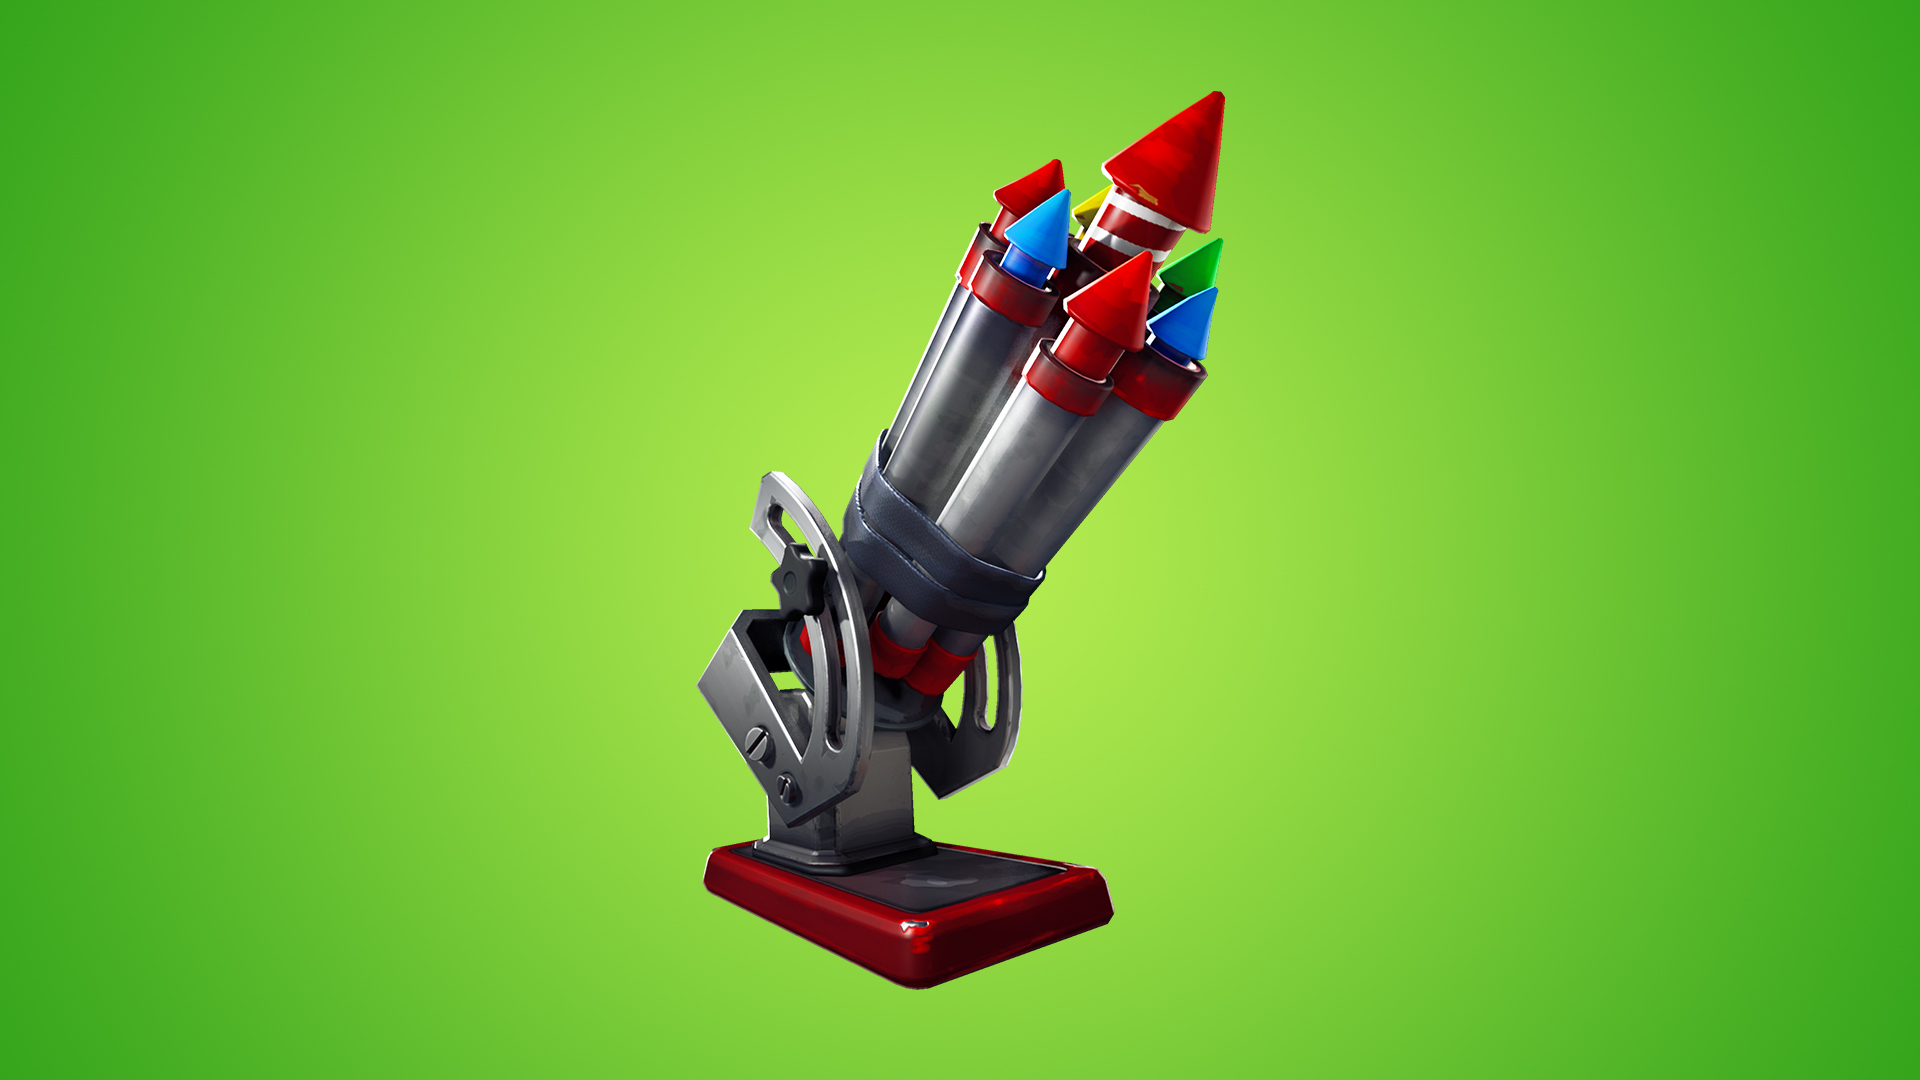 Fortnite Bottle Rockets Fortnite Bottle Rockets Are Vaulted After V8 01 Update Clingers And Infantry Rifle Start Spawning Less Often Dot Esports